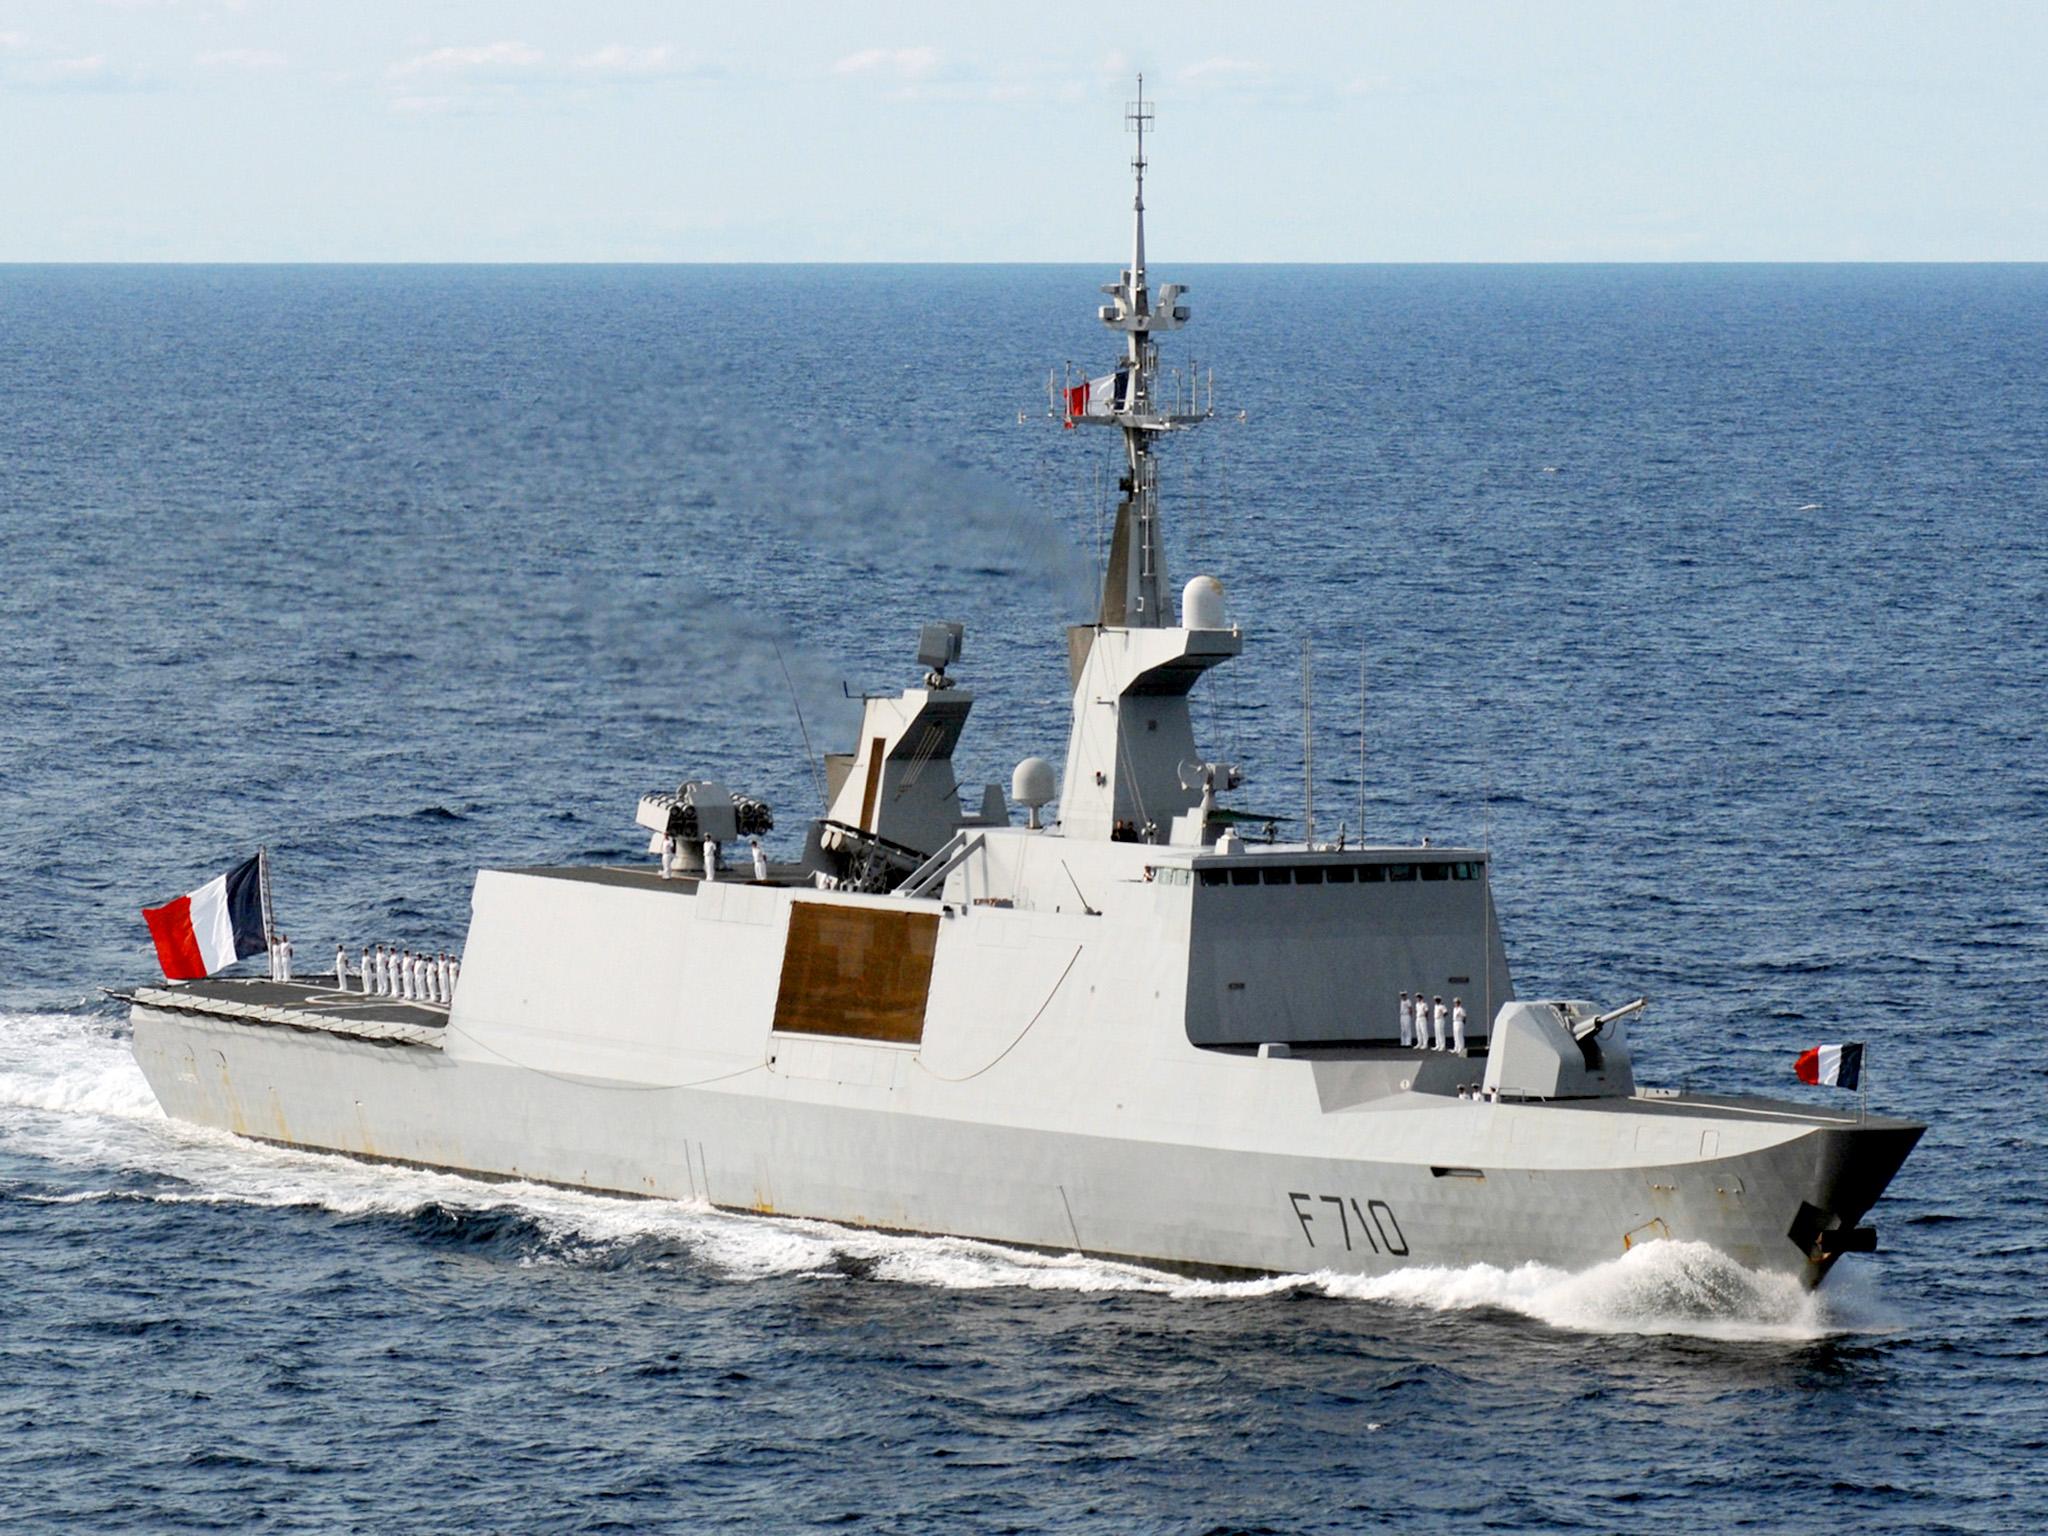 Macron said France would send a Lafayette frigate (pictured) and two Rafale jets to the area